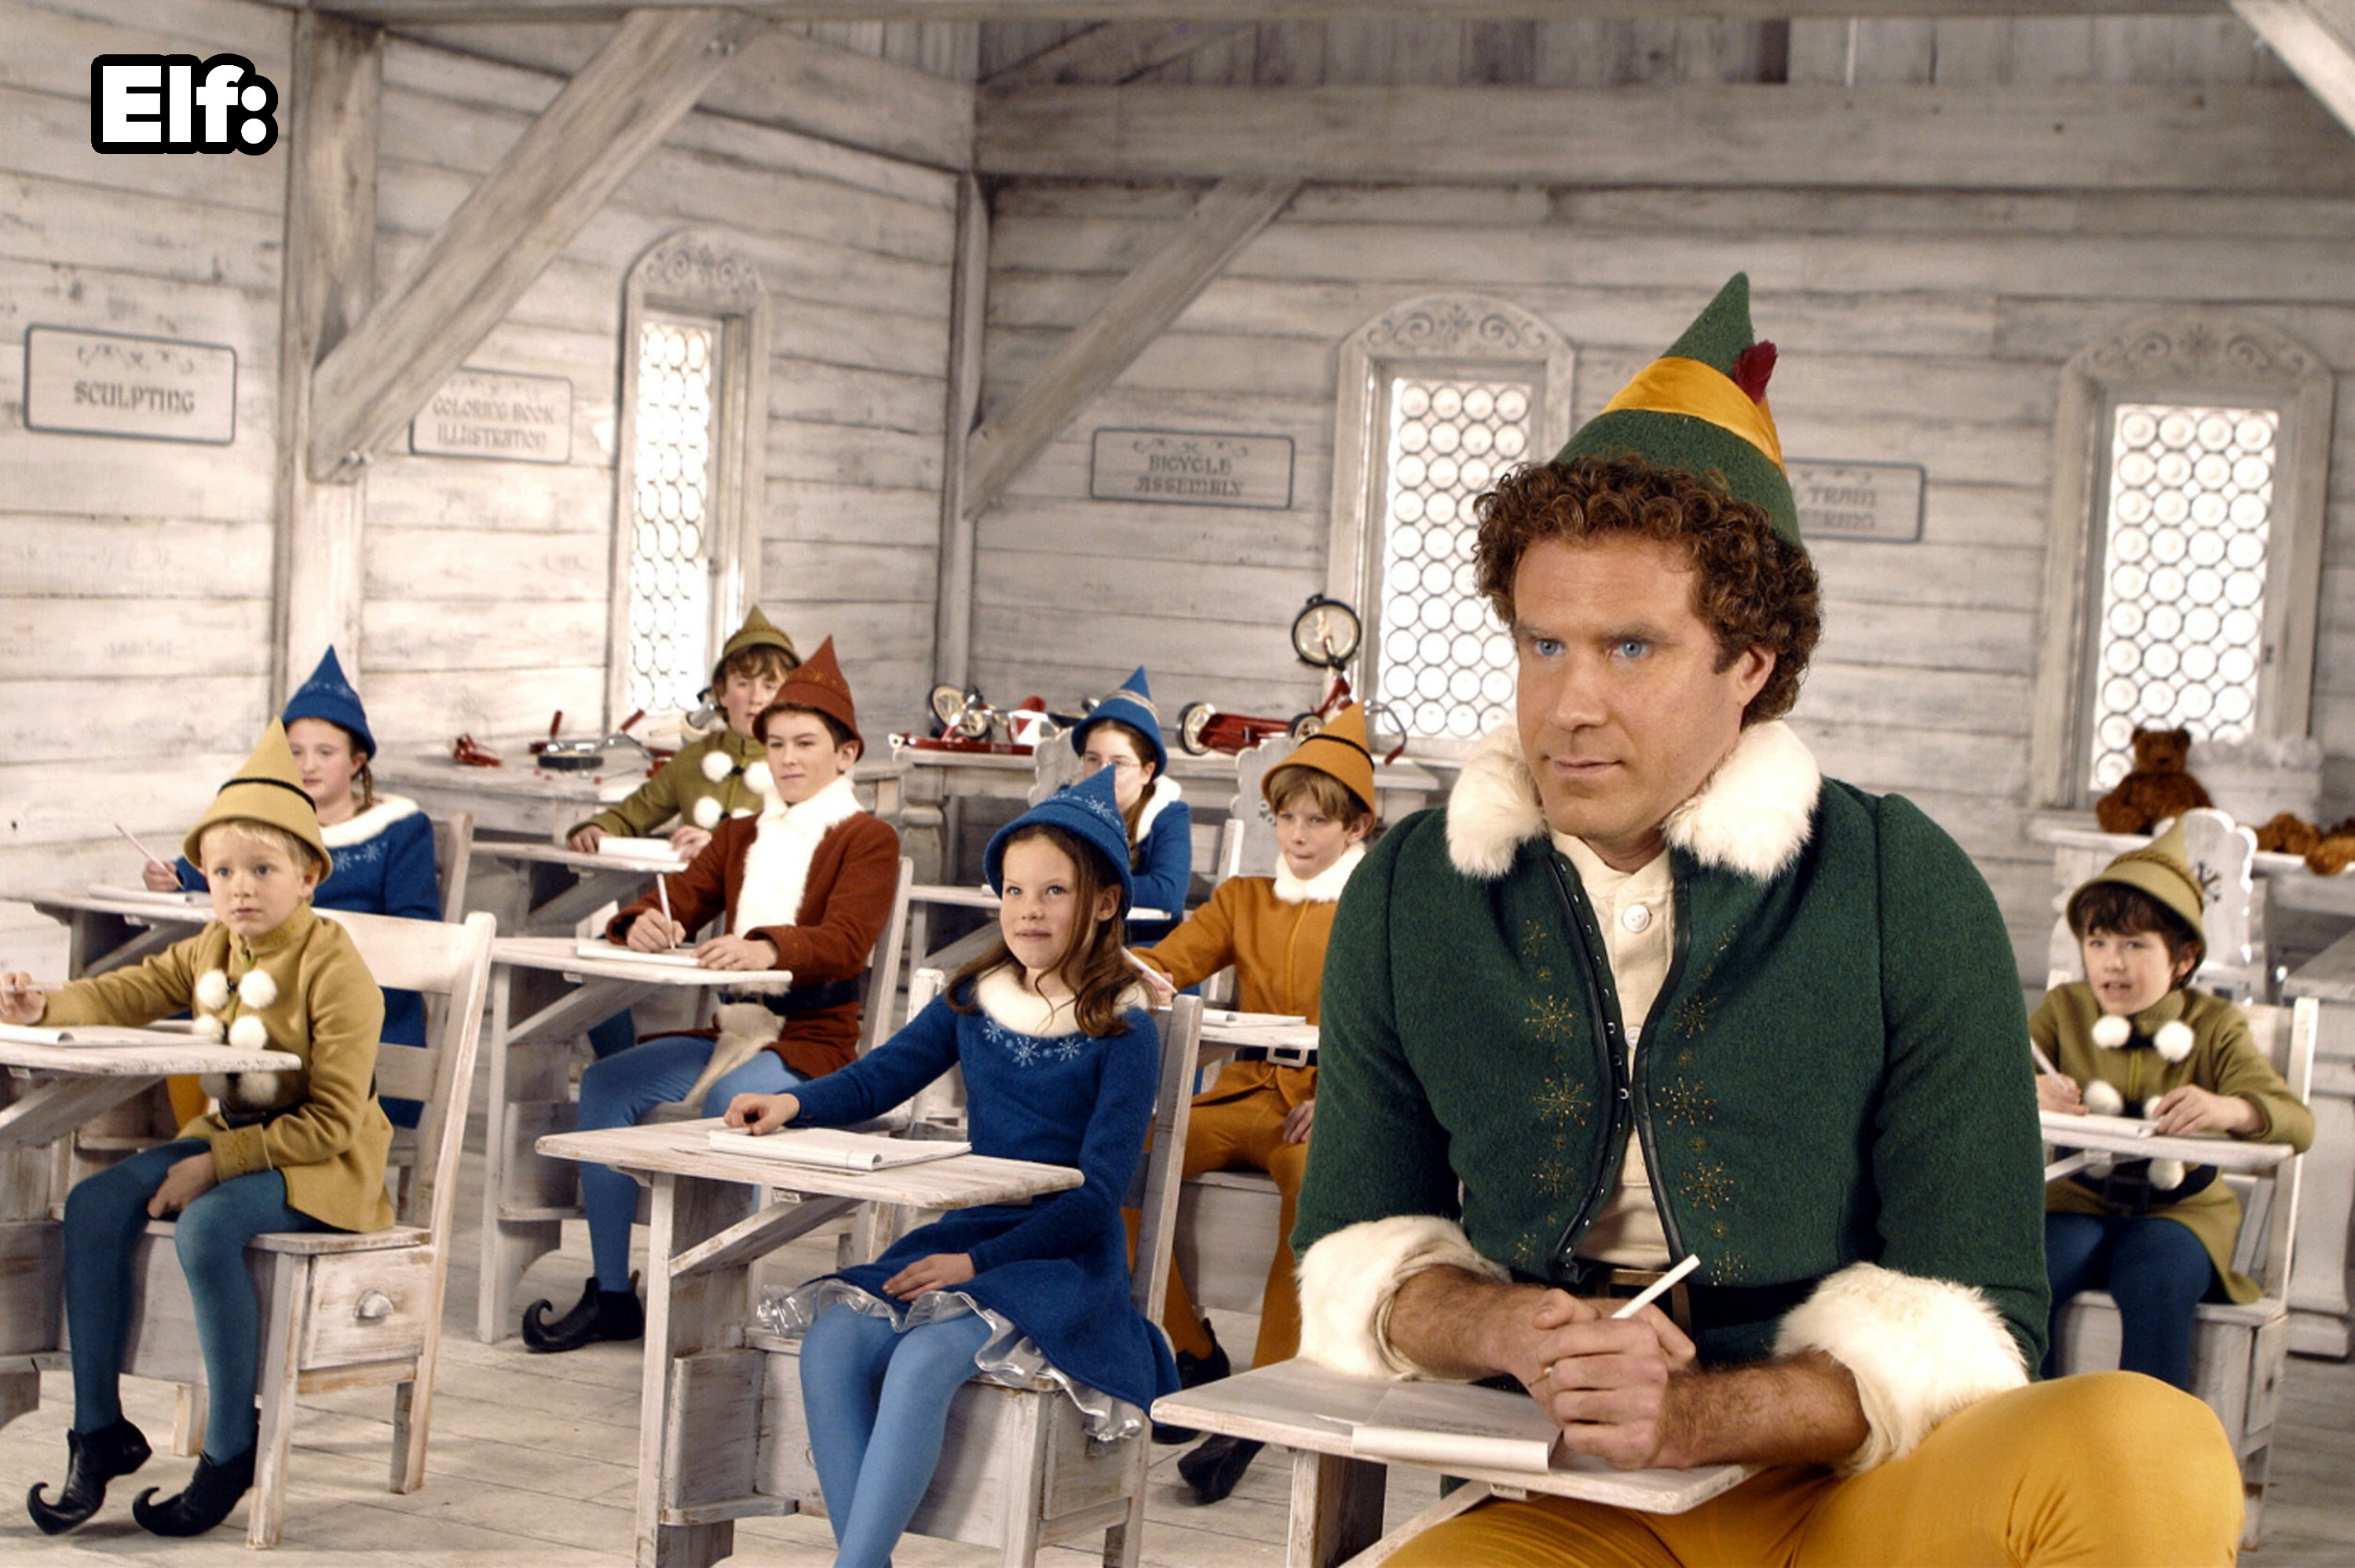 Will Ferrell looking like a giant sitting in a small desk in Elf